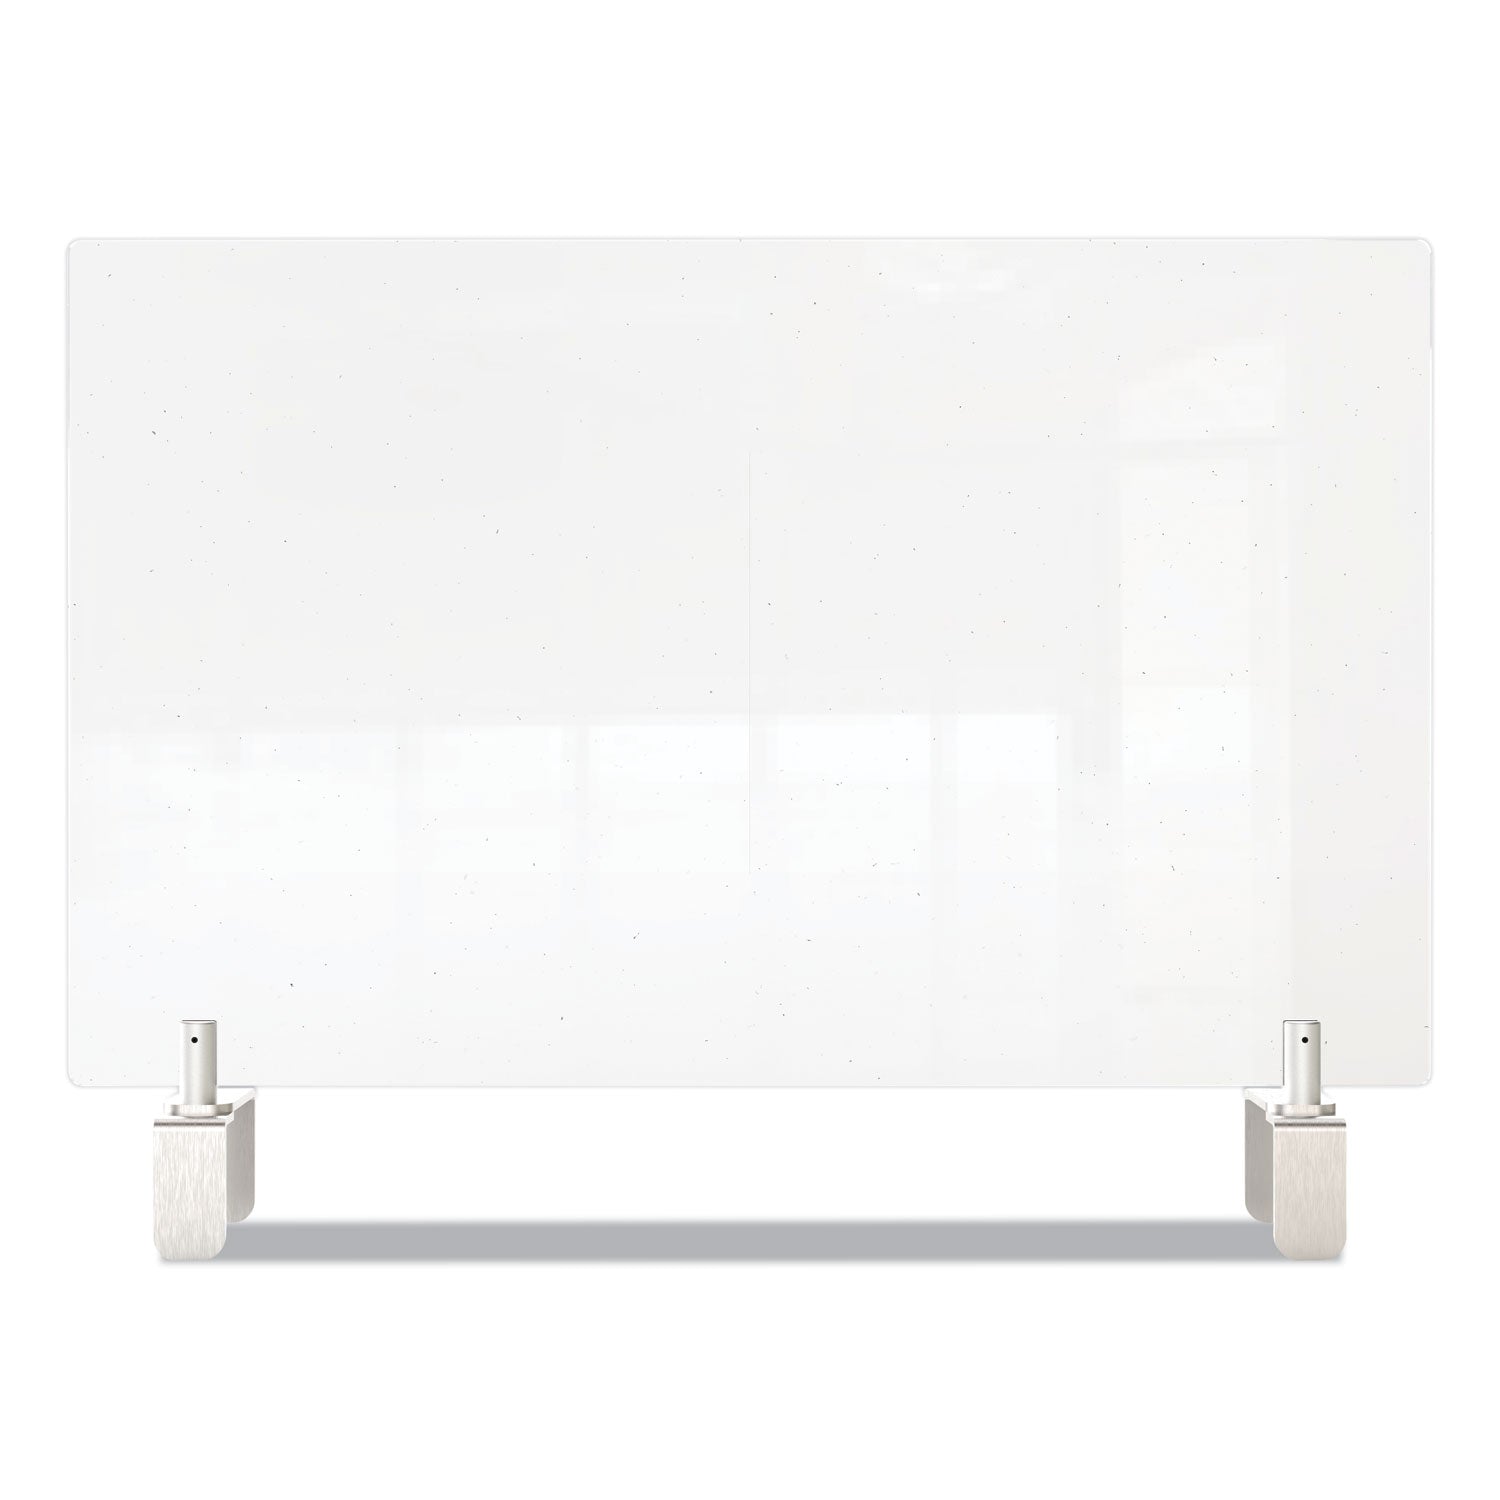 clear-partition-extender-with-attached-clamp-29-x-388-x-30-thermoplastic-sheeting_ghepec3029a - 2